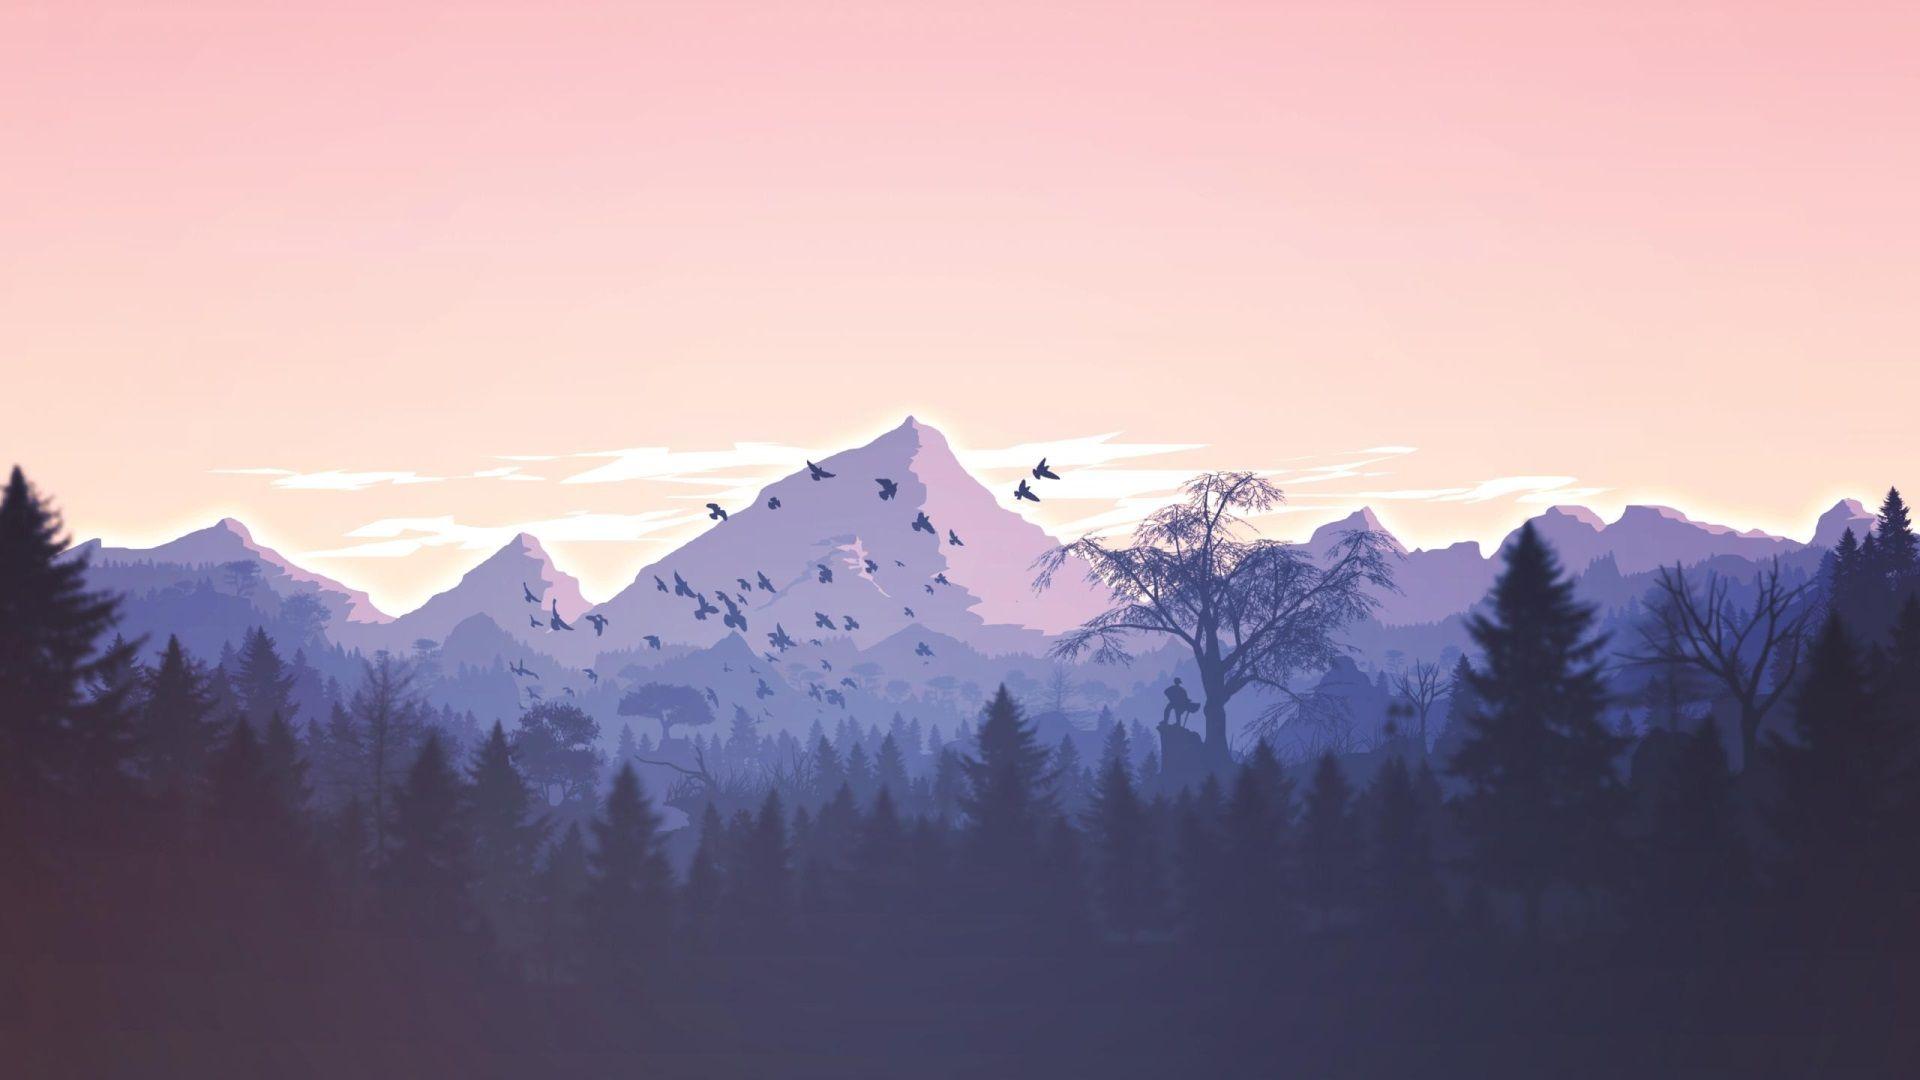 1920x1080 px first person shooter, the firewatch, landscape, nature, trees, birds, mountains, sky, trees, birds, nature, landscape, sky, trees, birds, nature, landscape, sky, trees, birds, nature, landscape, sky, trees, birds, nature, landscape, sky, trees, birds, nature, landscape, sky, trees, birds, nature, landscape, sky, trees, birds, nature, landscape, sky, trees, birds, nature, landscape, sky, trees, birds, nature, landscape, sky, trees, birds, nature, landscape, sky, trees, birds, nature, landscape, sky, trees, birds, nature, landscape, sky, trees, birds, nature, landscape, sky, trees, birds, nature, landscape, sky, trees, birds, nature, landscape, sky, trees, birds, nature, landscape, sky, trees, birds, nature, landscape, sky, trees, birds, nature, landscape, sky, trees, birds, nature, landscape, sky, trees, birds, nature, landscape, sky, trees, birds, nature, landscape, sky, trees, birds, nature, landscape, sky, trees, birds, nature, landscape, sky, trees, birds, nature, landscape, sky, trees, birds, nature, landscape, sky, trees, birds, nature, landscape, sky, trees, birds, nature, landscape, sky, trees, birds, nature, landscape, sky, trees, birds, nature, landscape, sky, trees, birds, nature, landscape, sky, trees, birds, nature, landscape, sky, trees, birds, nature, landscape, sky, trees, birds, nature, landscape, sky, trees, birds, nature, landscape, sky, trees, birds, nature, landscape, sky, trees, birds, nature, landscape, sky, trees, birds, nature, landscape, sky, trees, birds, nature, landscape, sky, trees, birds, nature, landscape, sky, trees, birds, nature, landscape, sky, trees, birds, nature, landscape, sky, trees, birds, nature, landscape, sky, trees, birds, nature, landscape, sky, trees, birds, nature, landscape, sky, trees, birds, nature, landscape, sky, trees, birds, nature, landscape, sky, trees, birds, nature, landscape, sky, trees, birds, nature, landscape, sky, - Nature